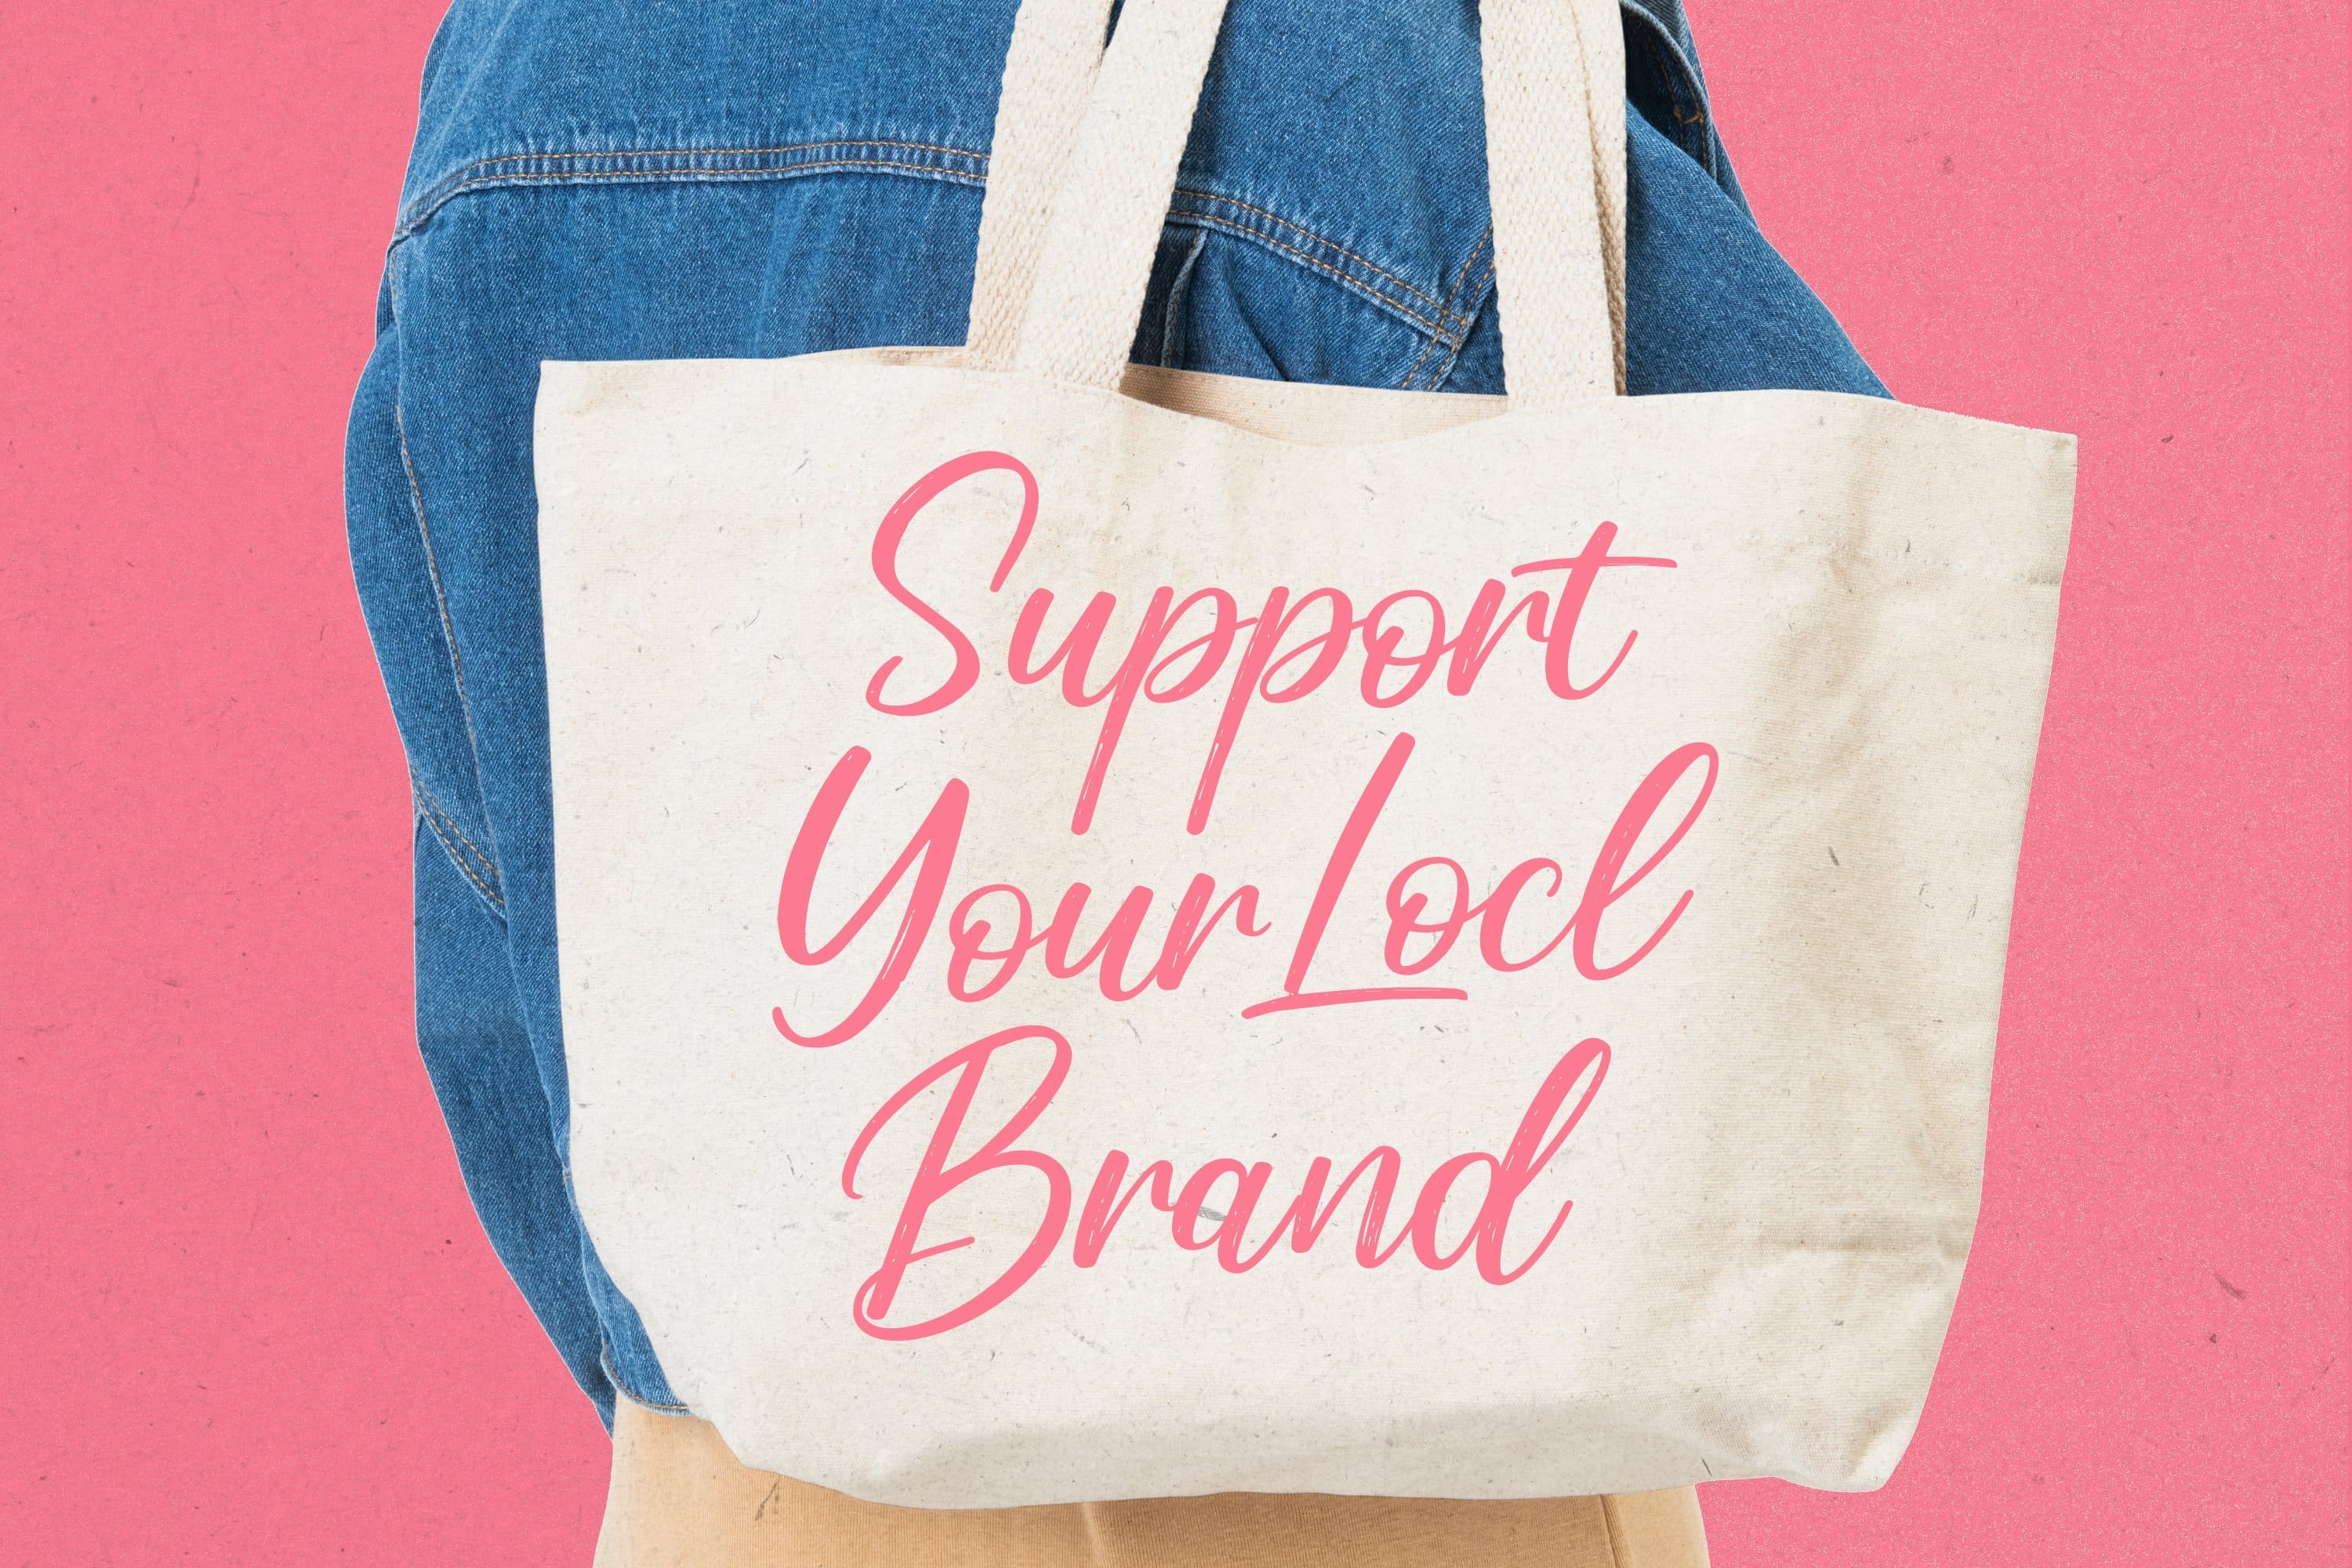 Bag print "Support Your Locl Brand".